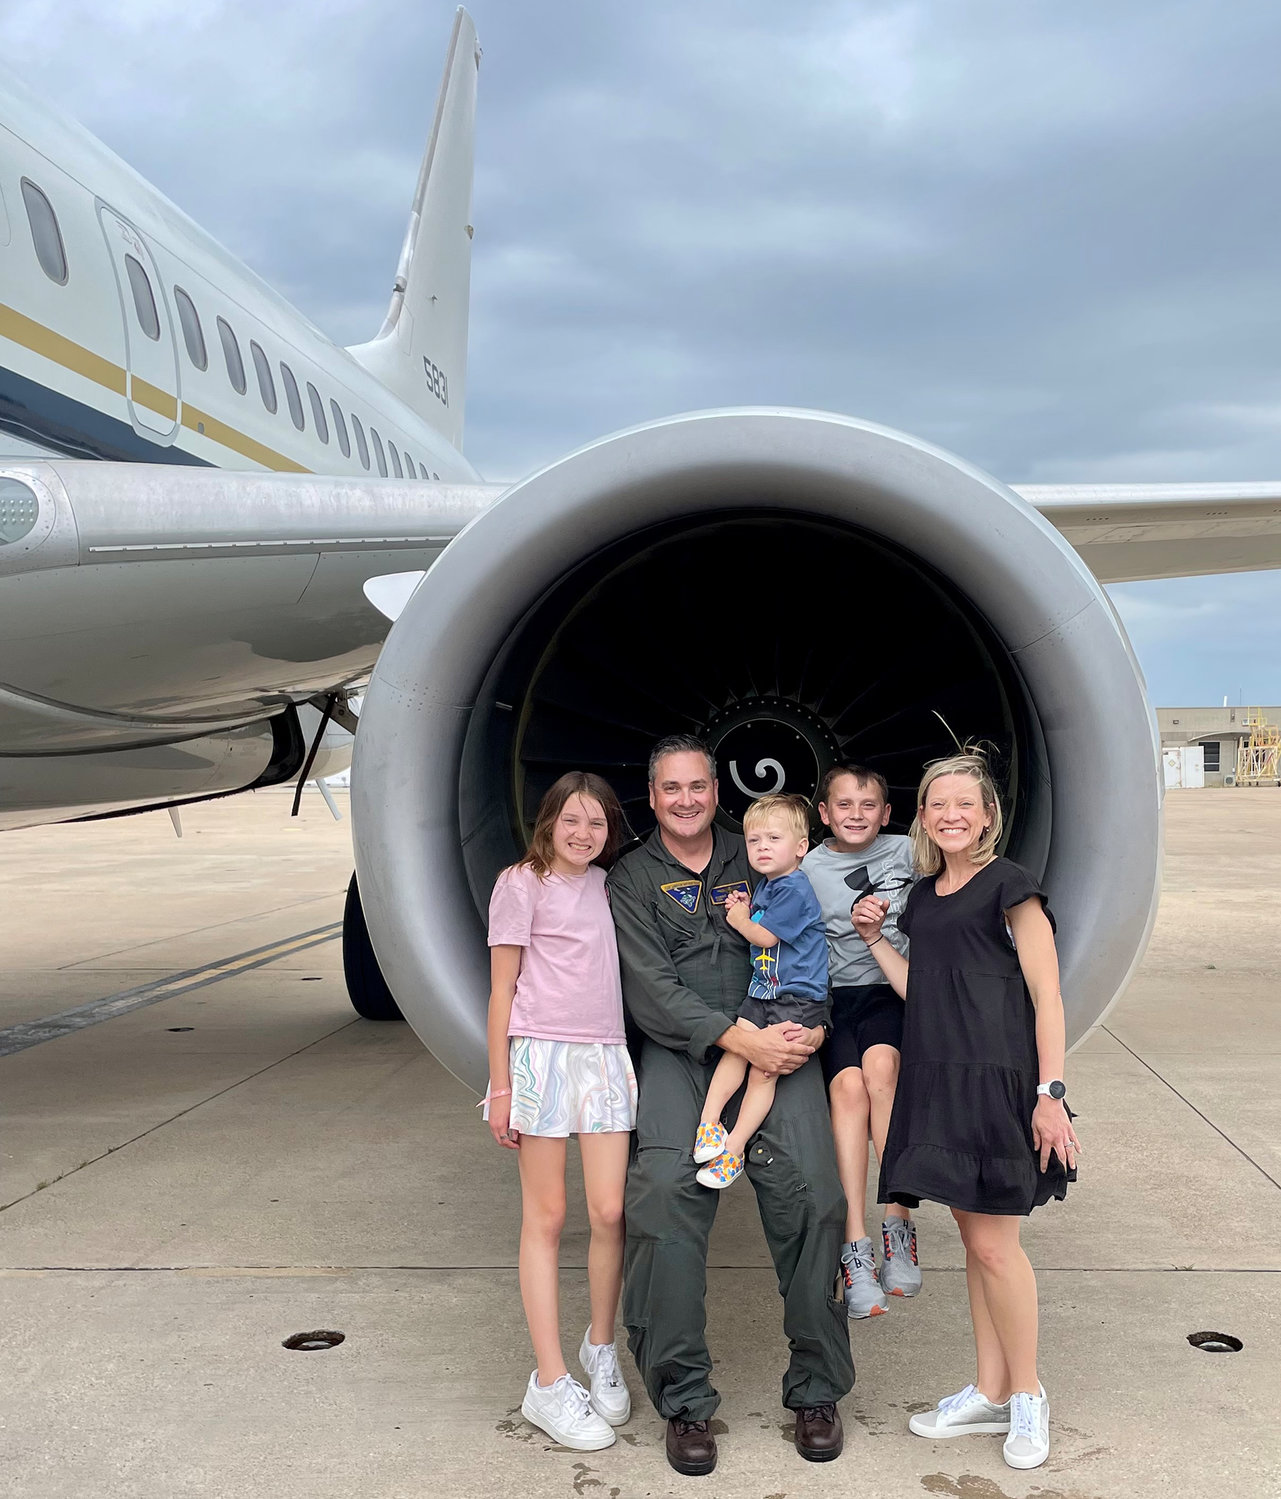 CDR Robert Gustavson is shown after his last flight with family members (from left) Adeline, Wyatt, Liam, and wife Holly.